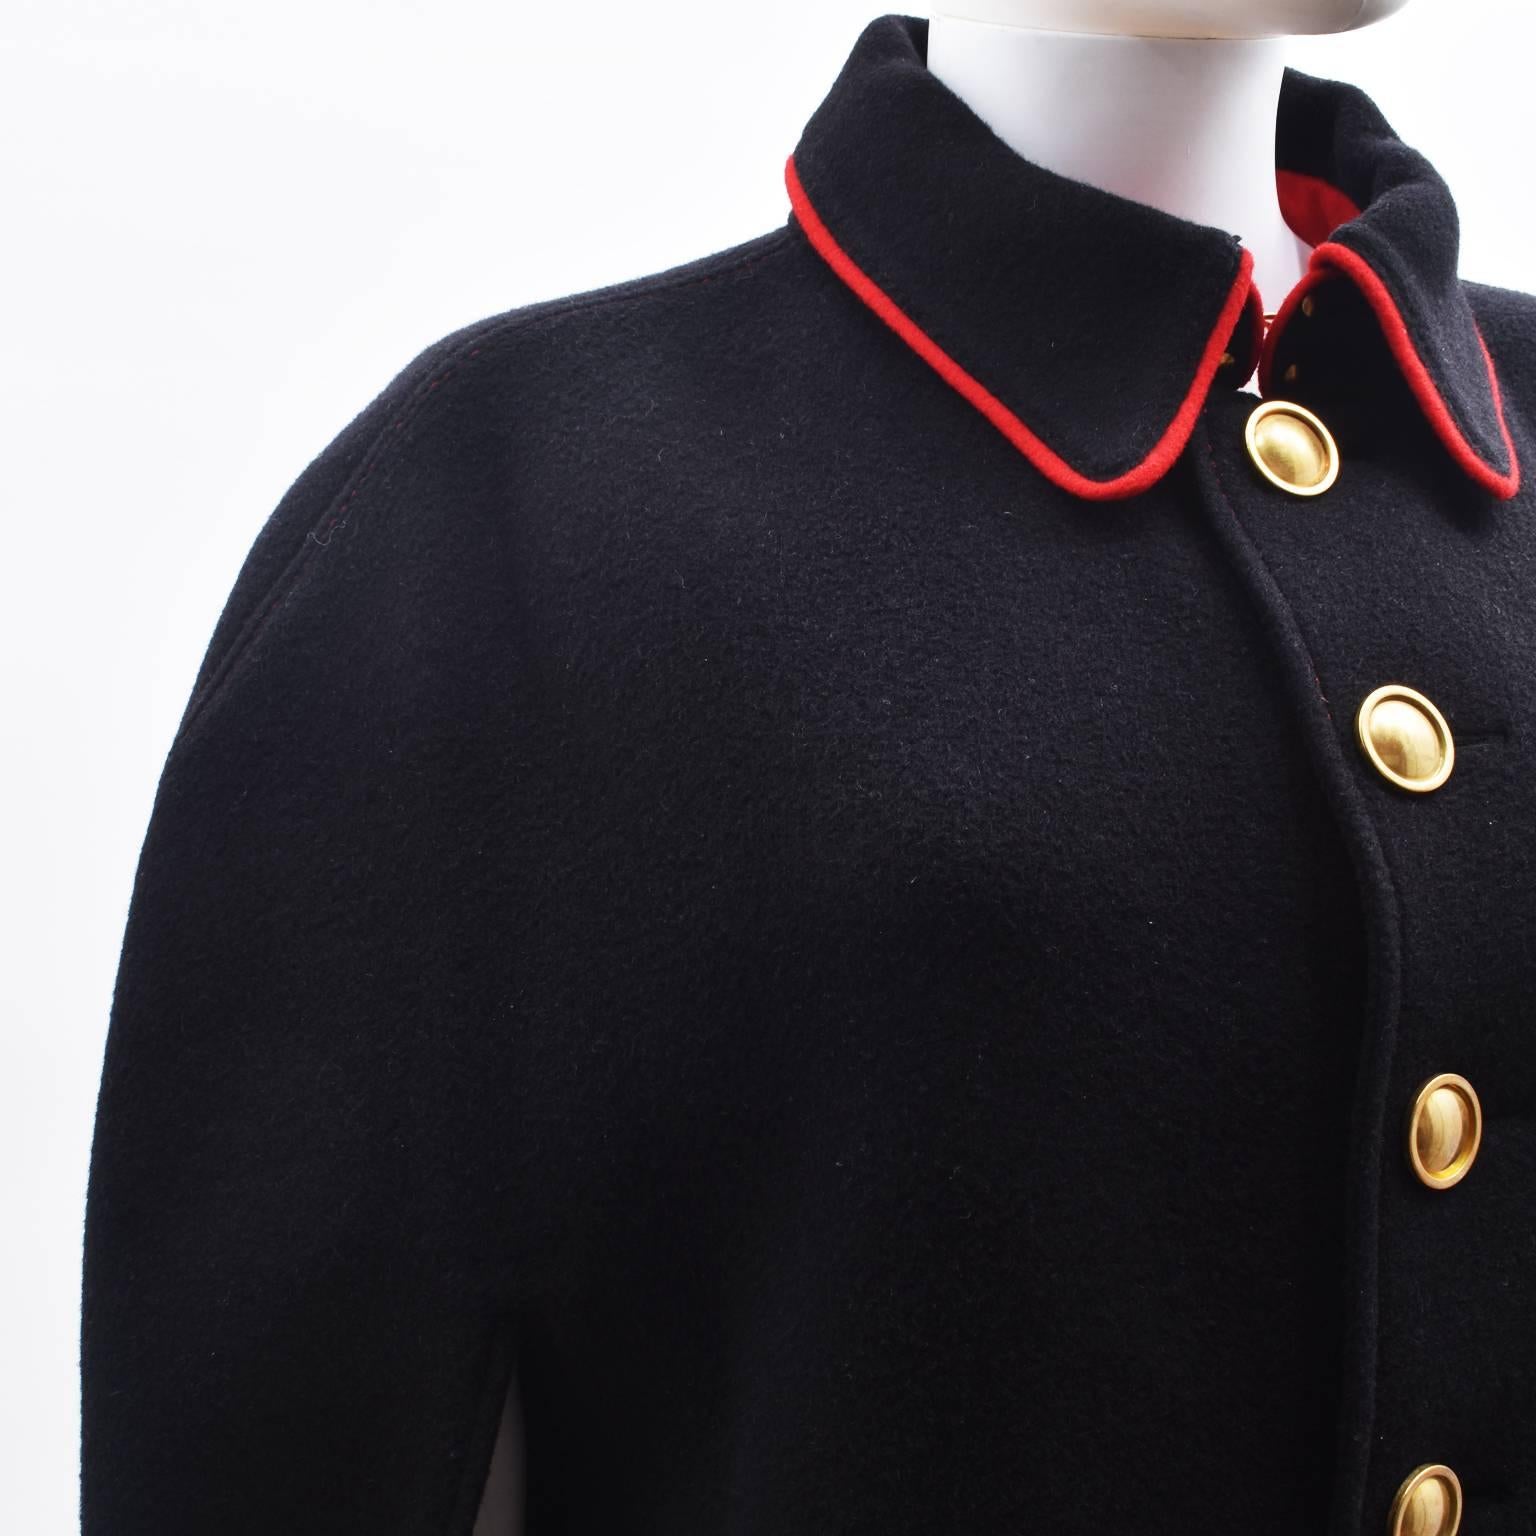 Burberry Black Wool Winter Cape with Red Piping and Brass Buttons 2